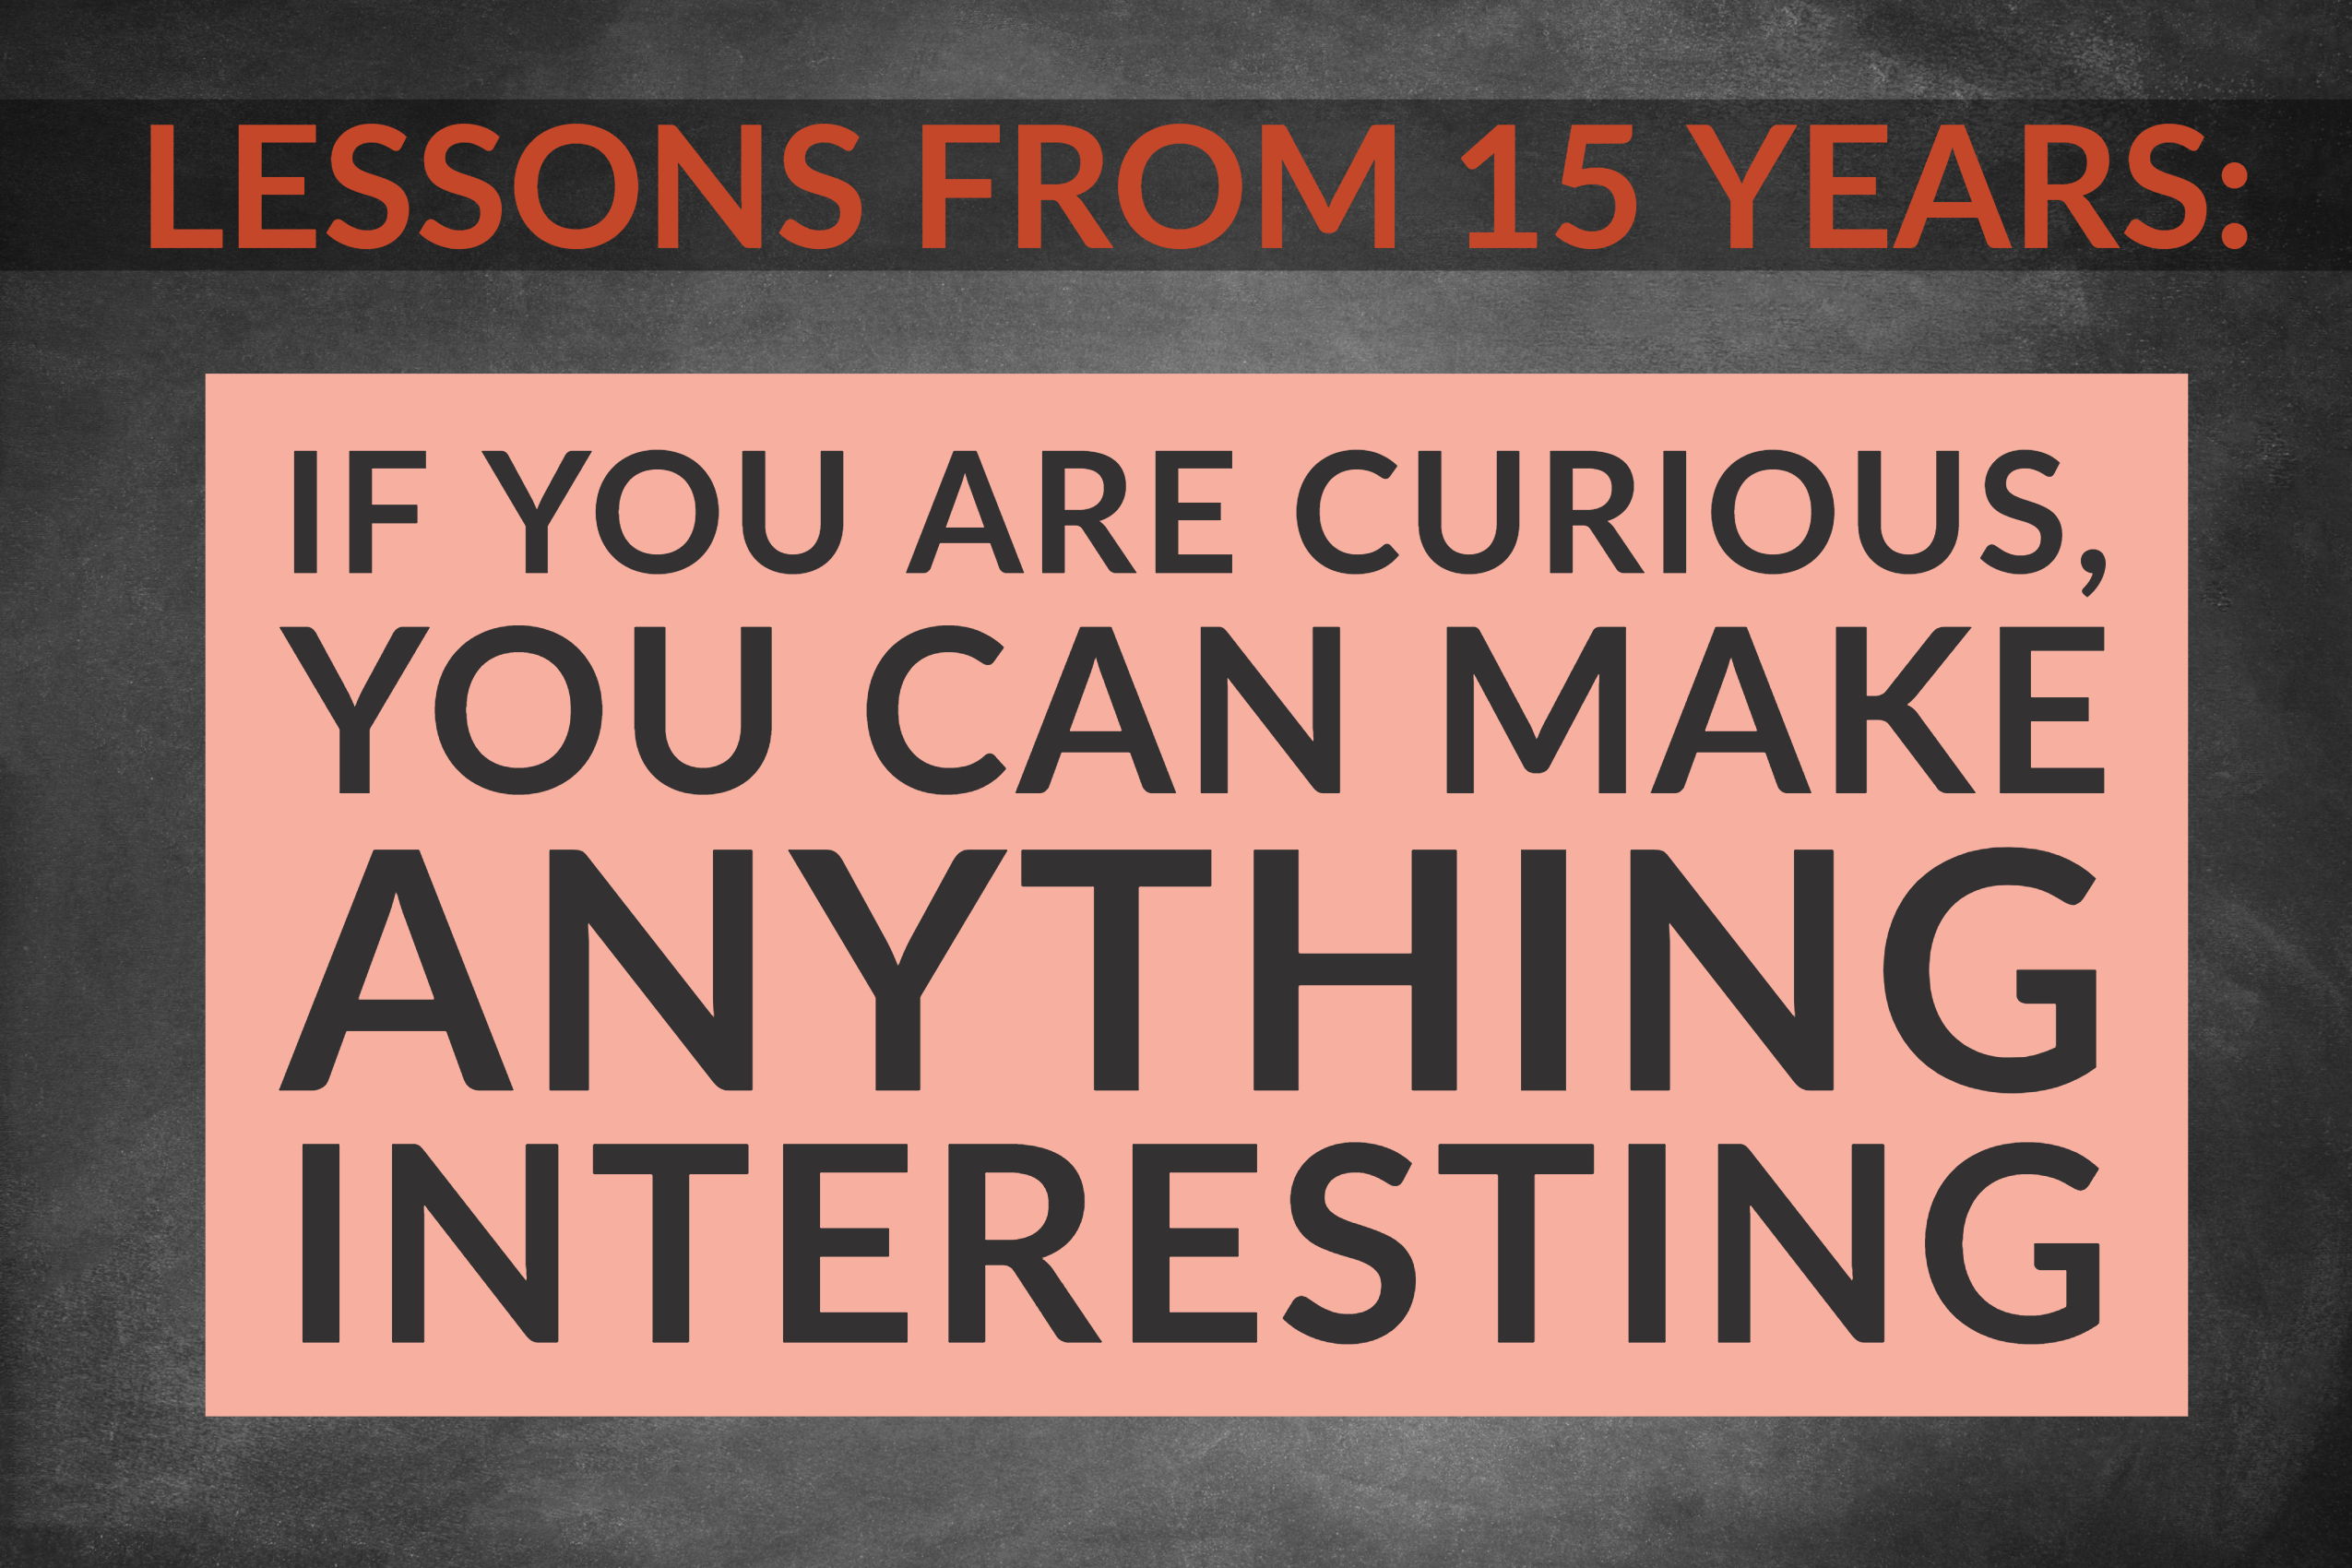 Lessons from 15 Years: If You Are Curious, You Can Make Anything Interesting